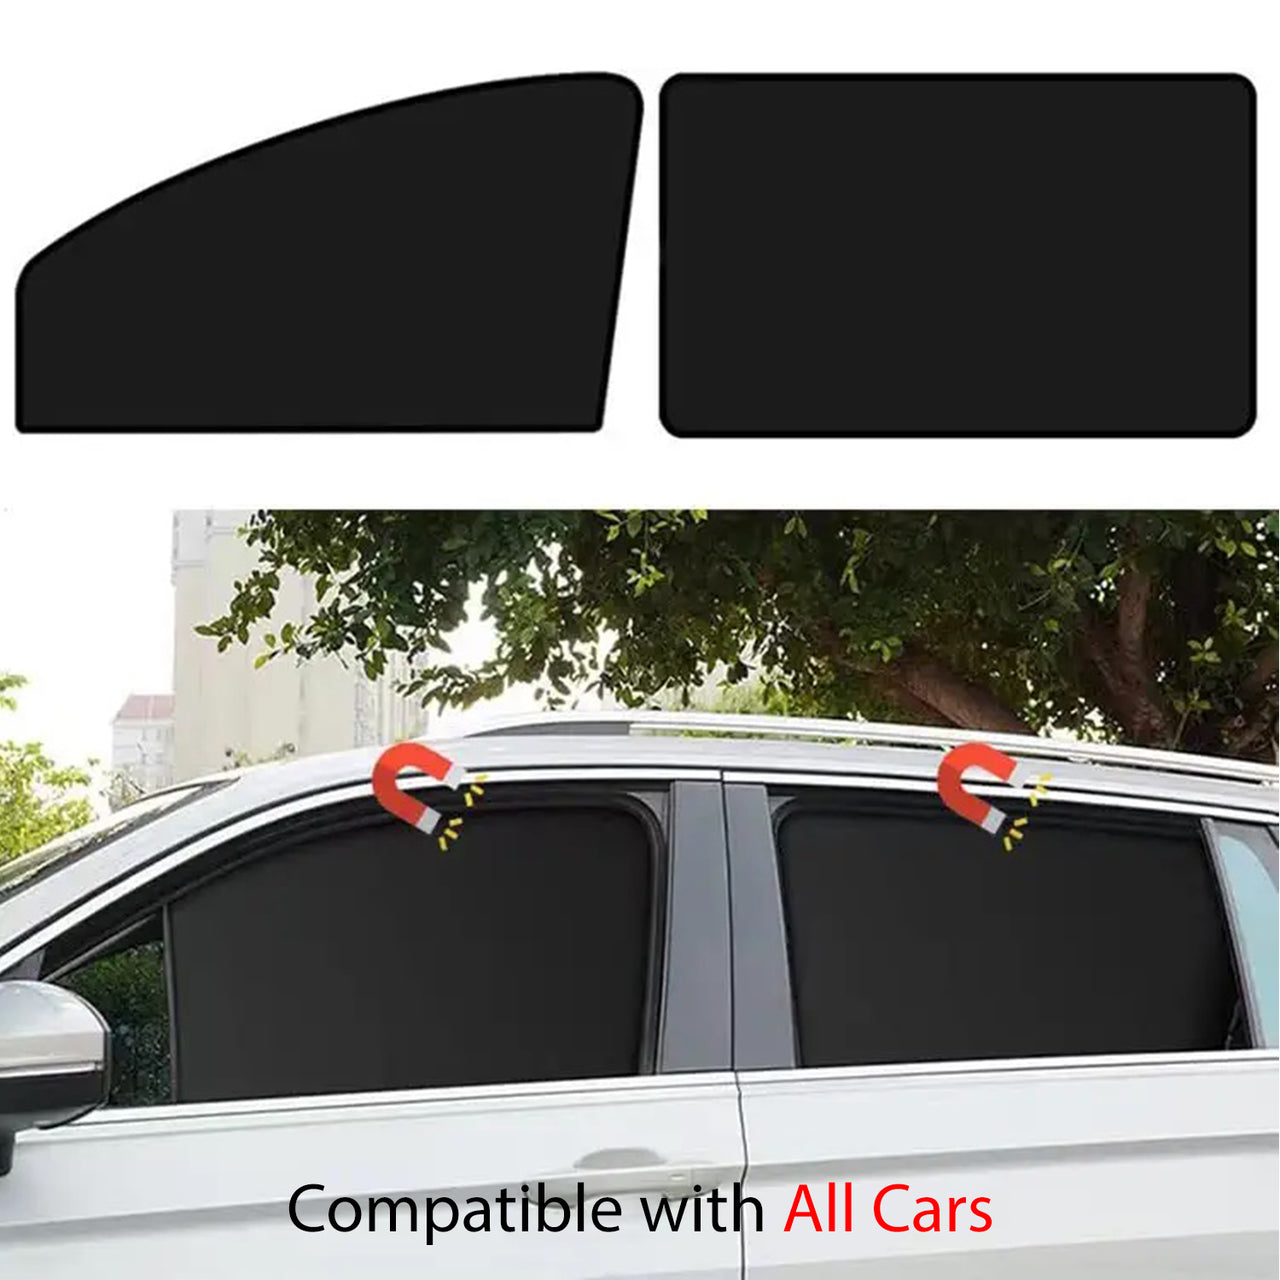 Car Side Window Sun Shades, Custom Fit For Your Cars, Window Sunshades Privacy Curtains, 100% Block Light for Breastfeeding, Taking a nap, Changing Clothes, Camping FJ15980